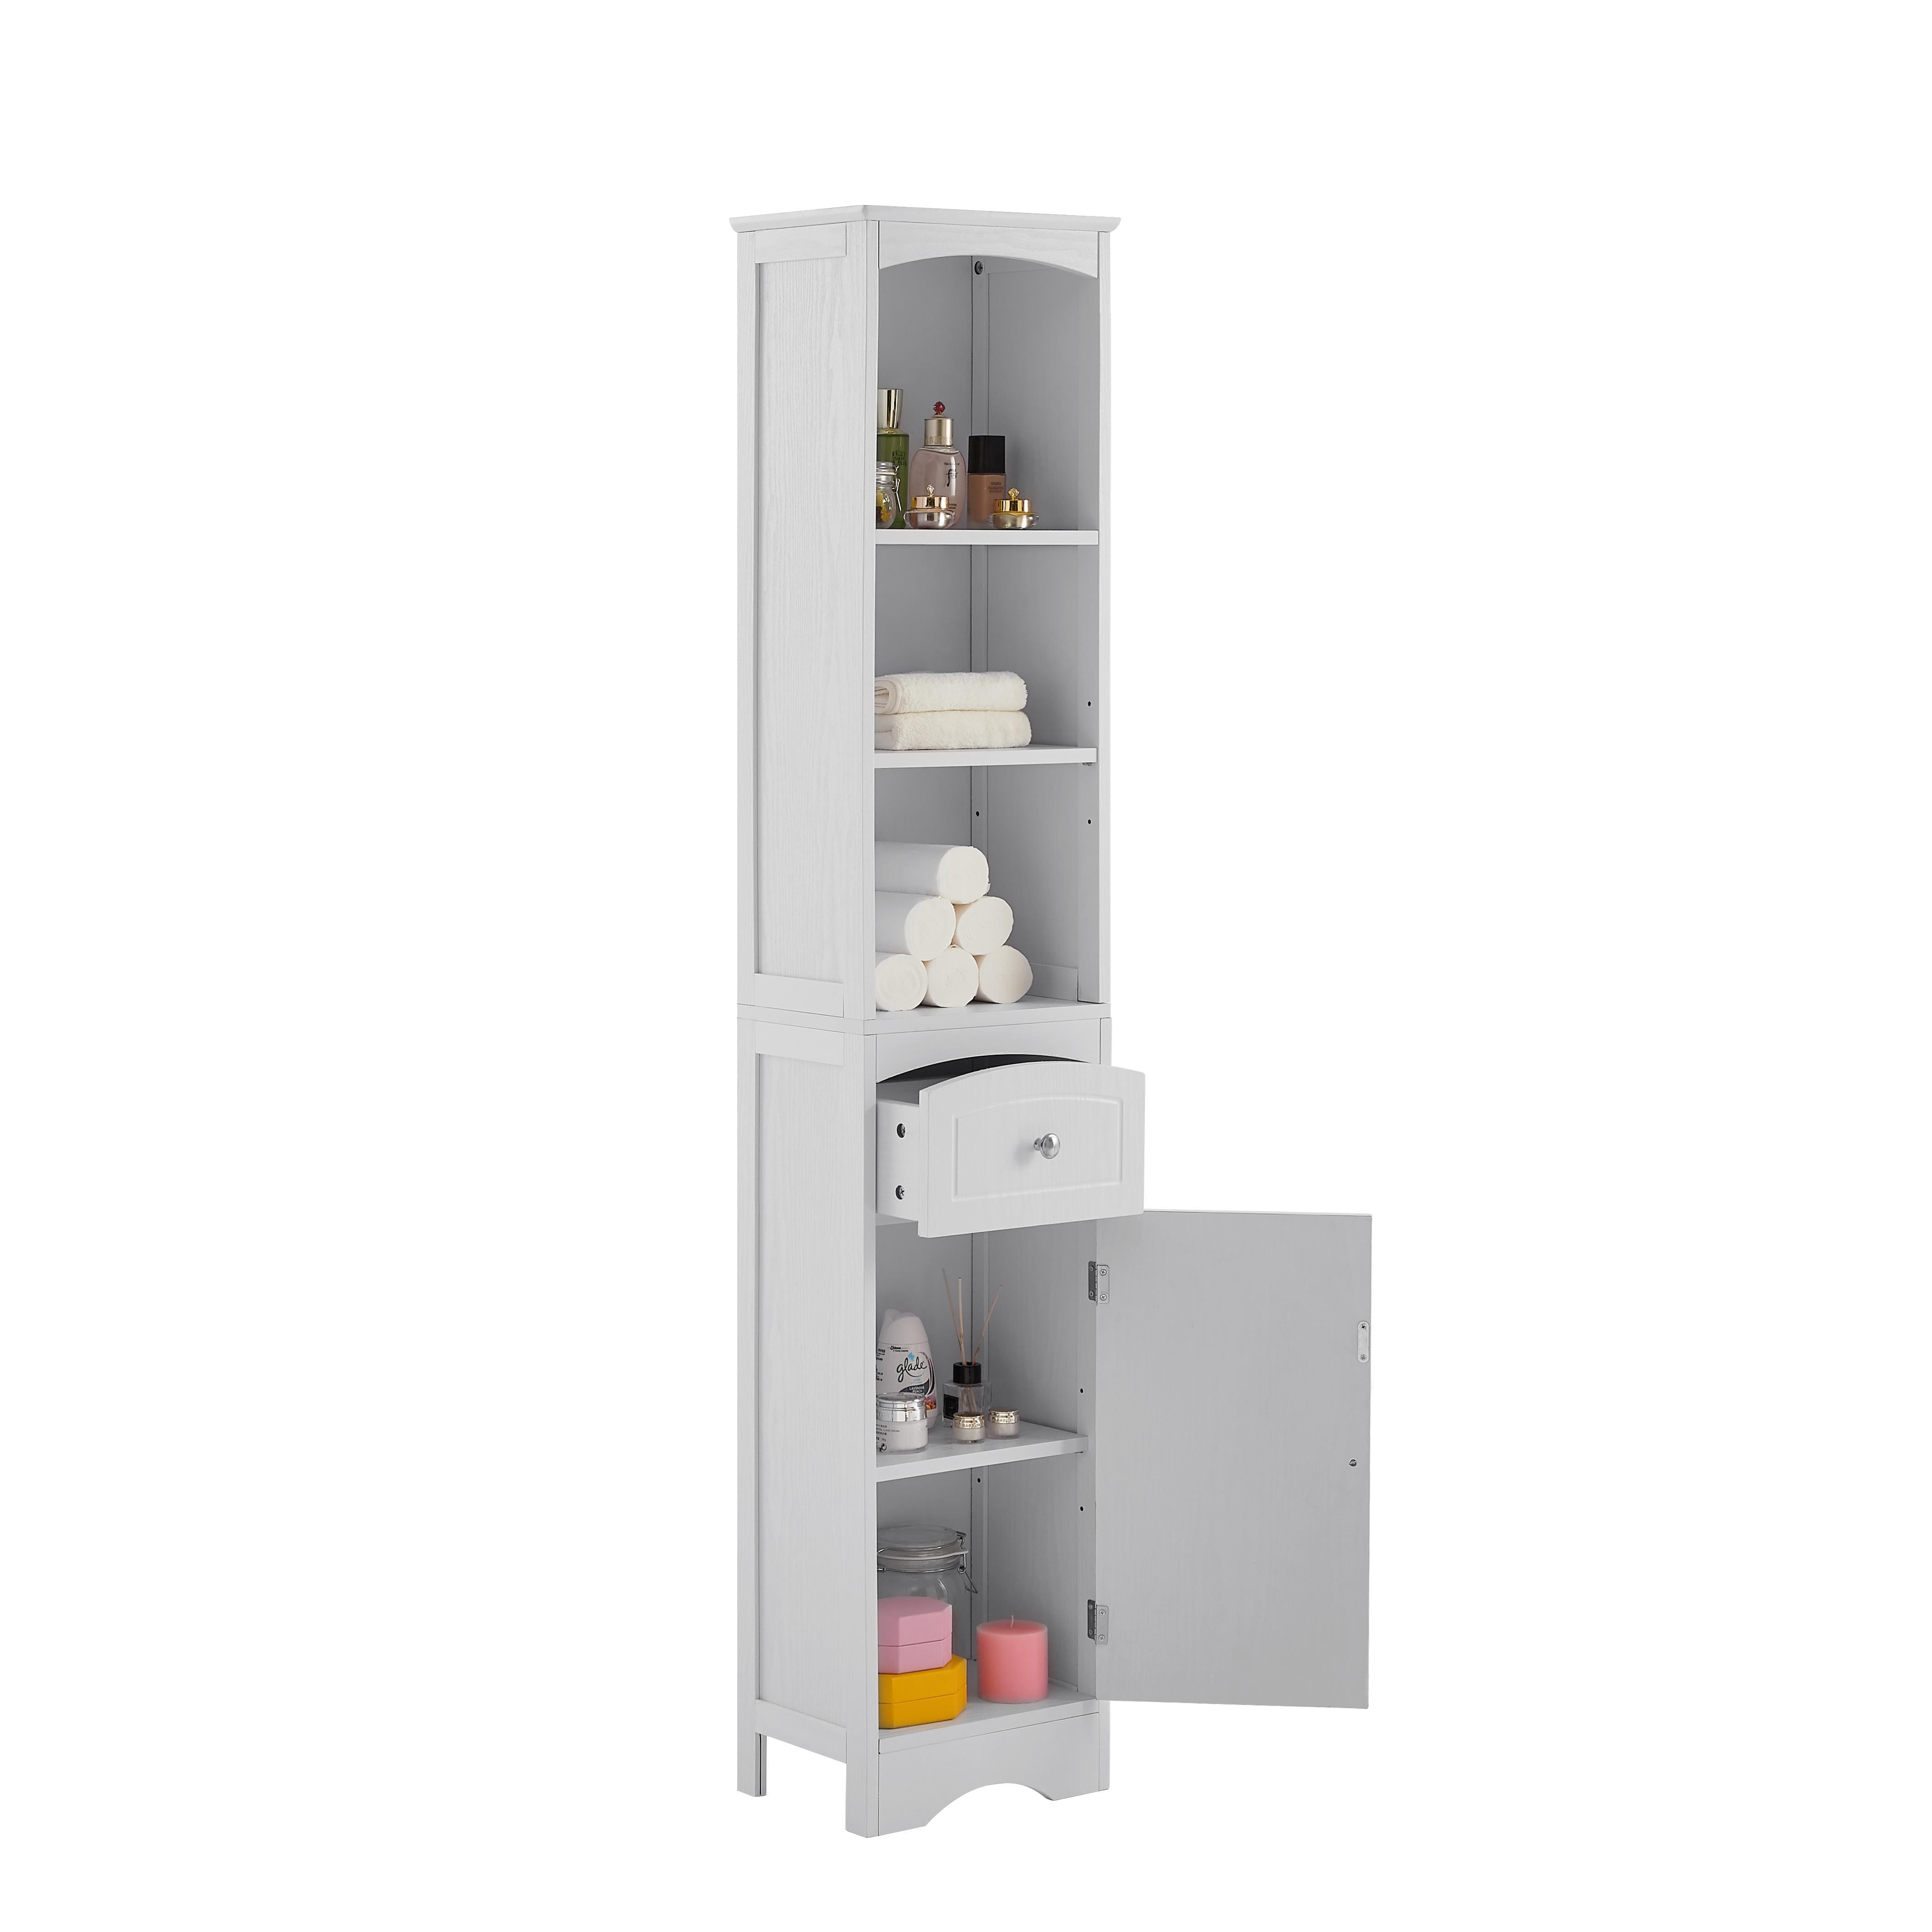 GoMaihe Bathroom Storage Cabinet Narrow: 2-Tier Plastic Floor Cabinet with  Drawers for Small Spaces - Slim Toilet Tower with Wheels Width 8.66